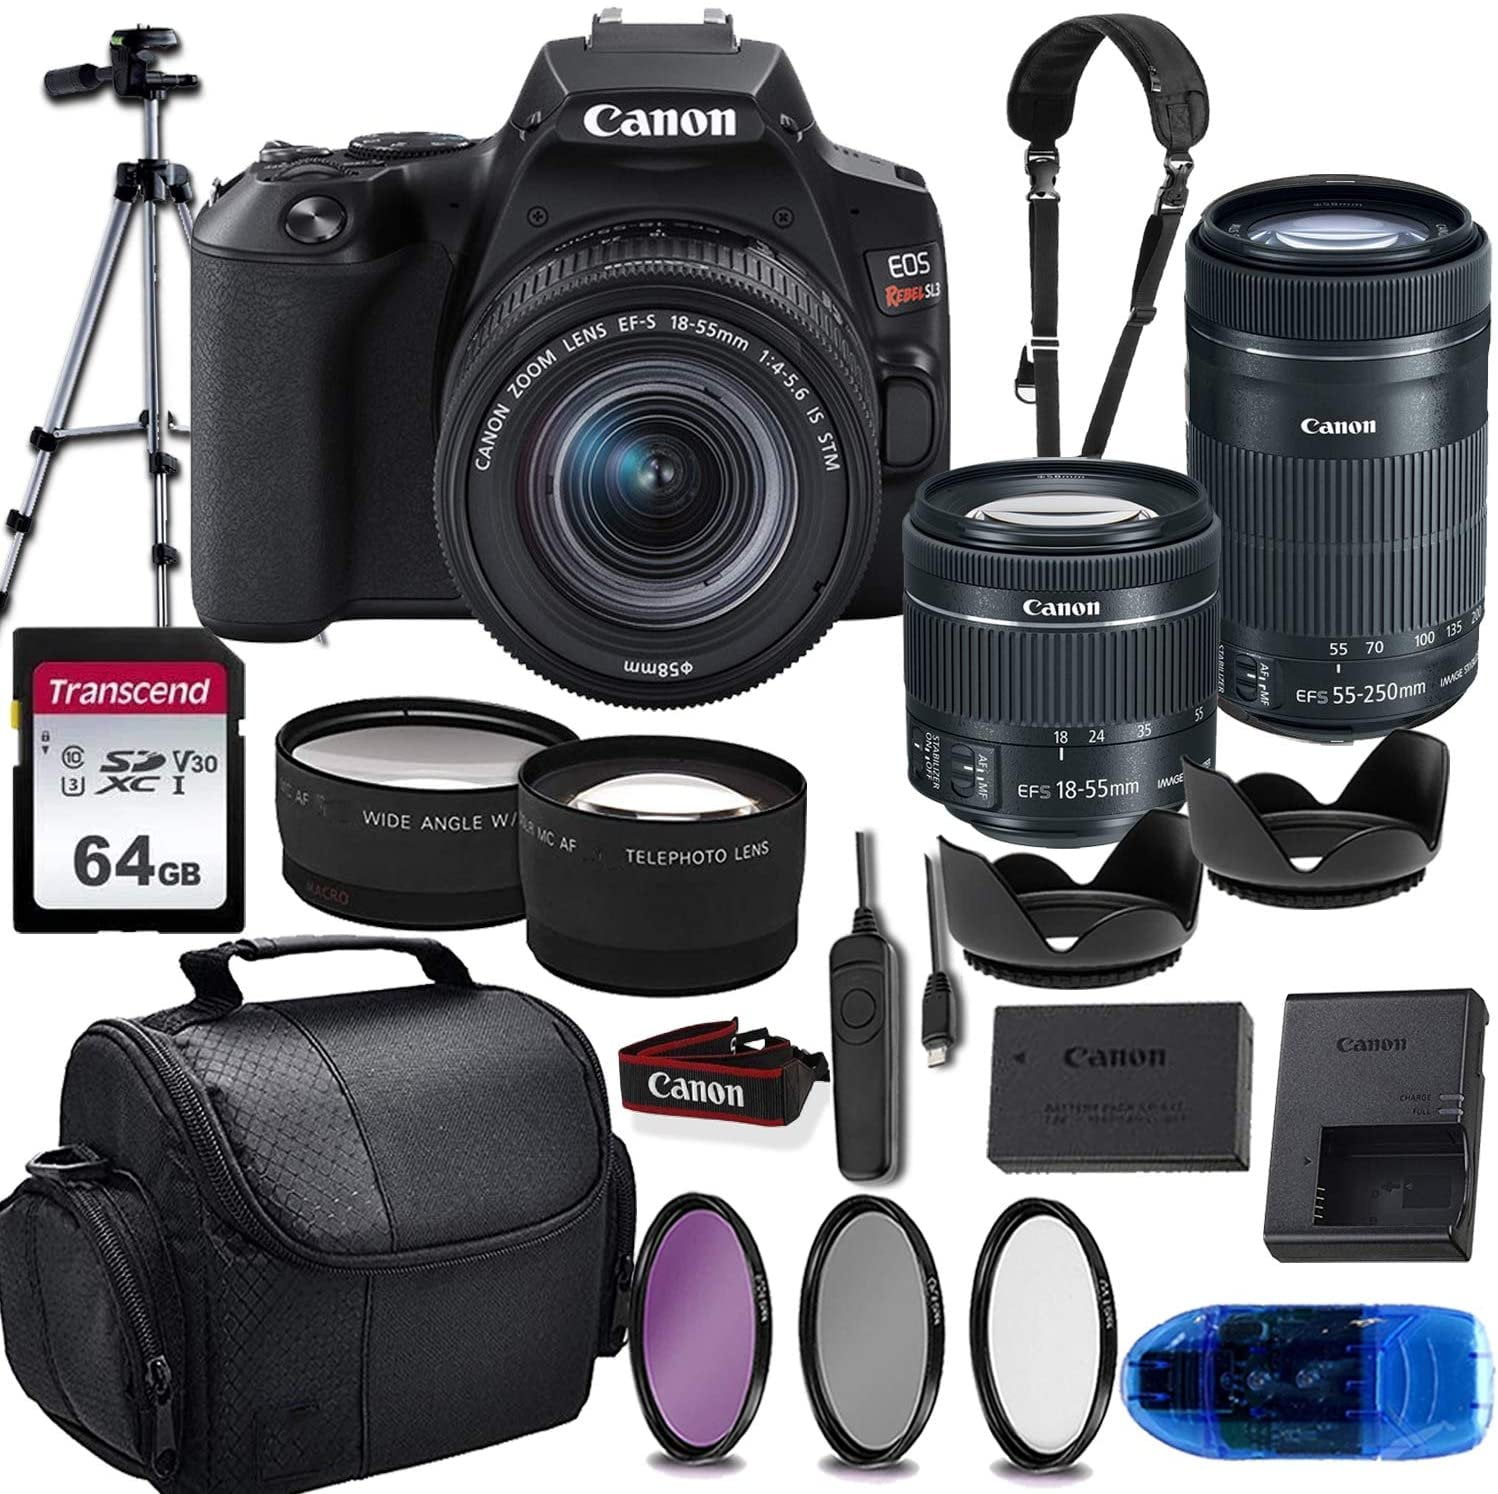  Canon EOS 4000D DSLR Camera with 18-55mm f/3.5-5.6 Zoom  Lens,32GB Memory, Case,Tripod w/Hand Grip and More(28pc Bundle) :  Electronics